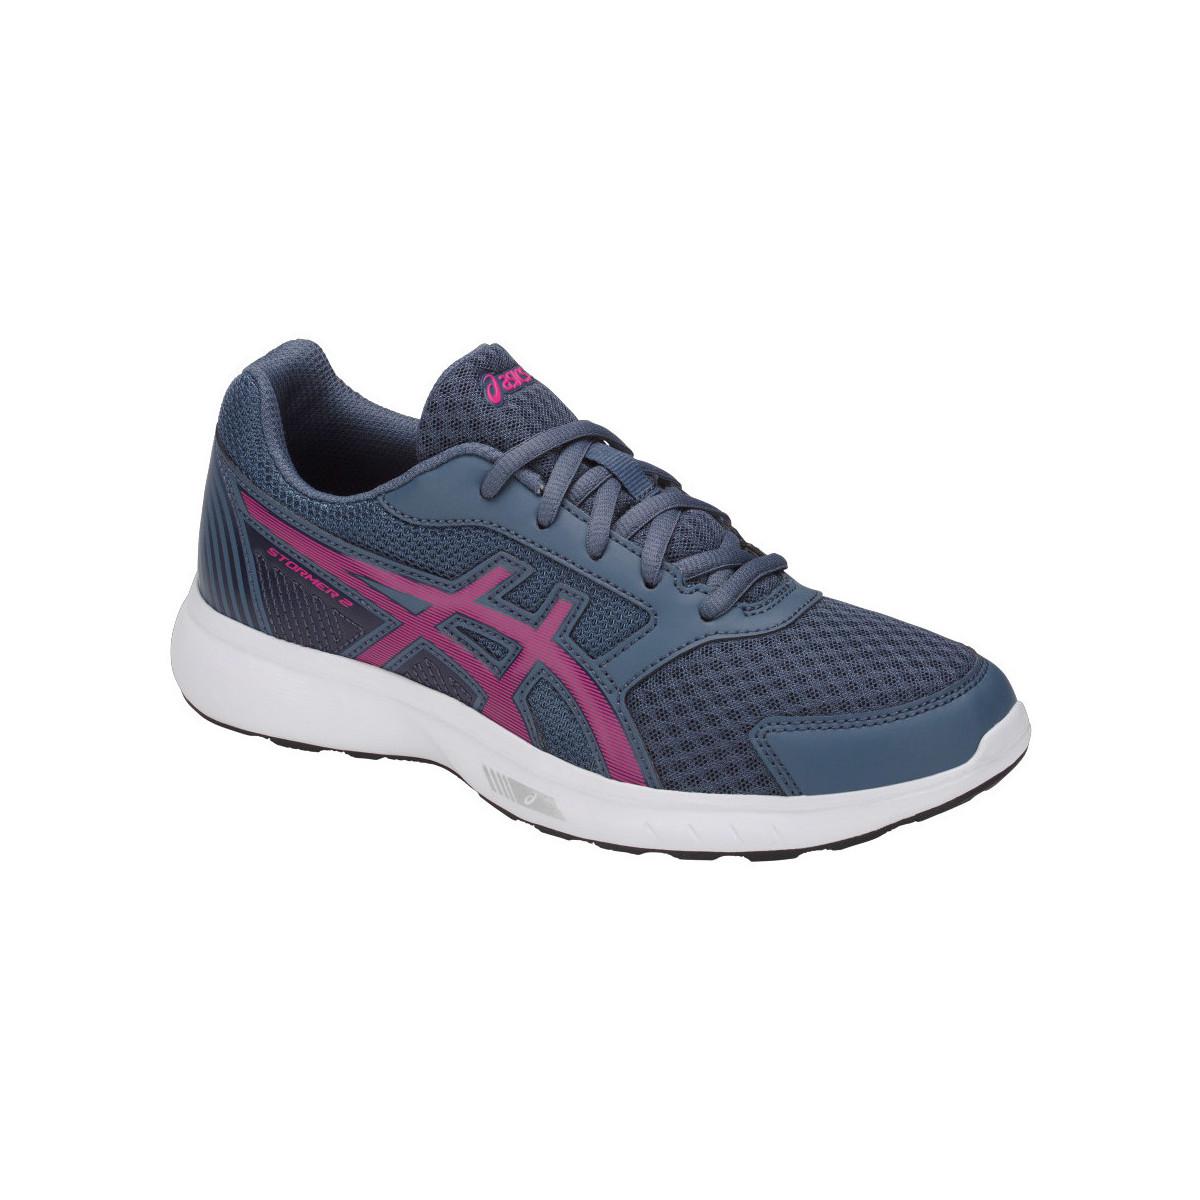 Asics Stormer 2 T893n 5619 Women's Shoes (trainers) In Grey in Grey - Lyst